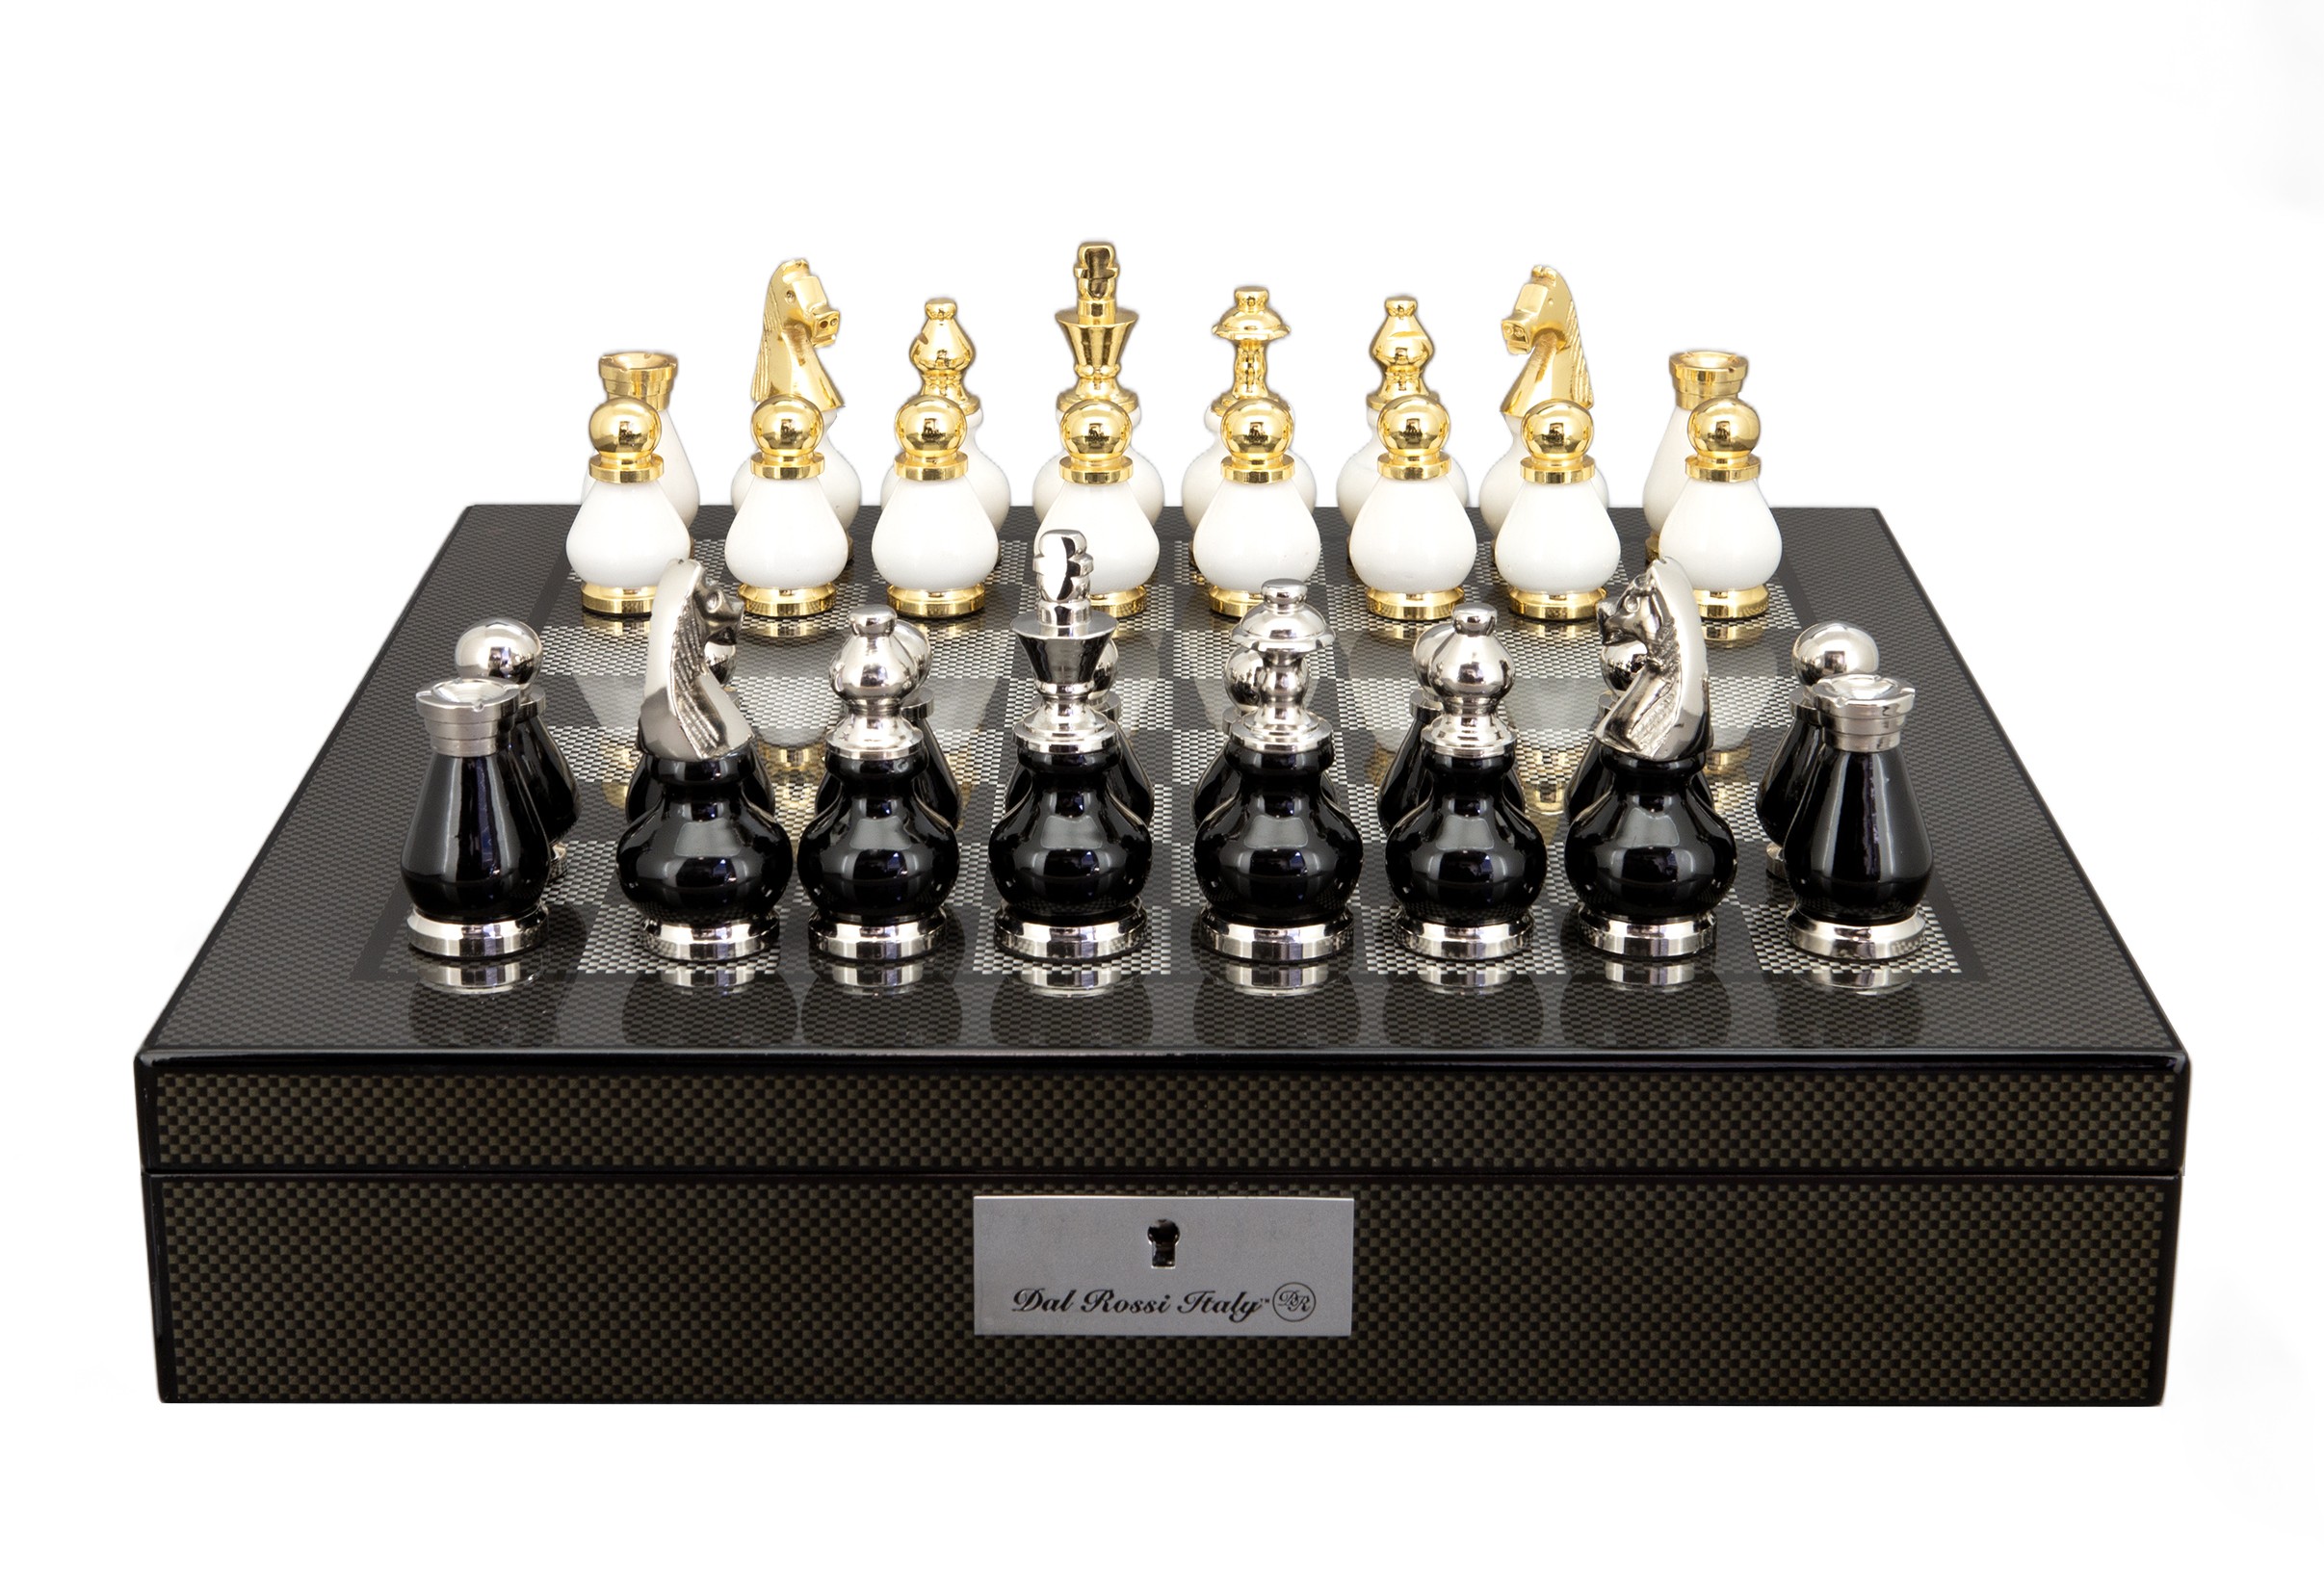 Dal Rossi Italy, Black and White with Gold and Silver Tops and Bottoms Chessmen 90mm on a Carbon Fibre Finish Shiny Chess Box with Compartments 16"